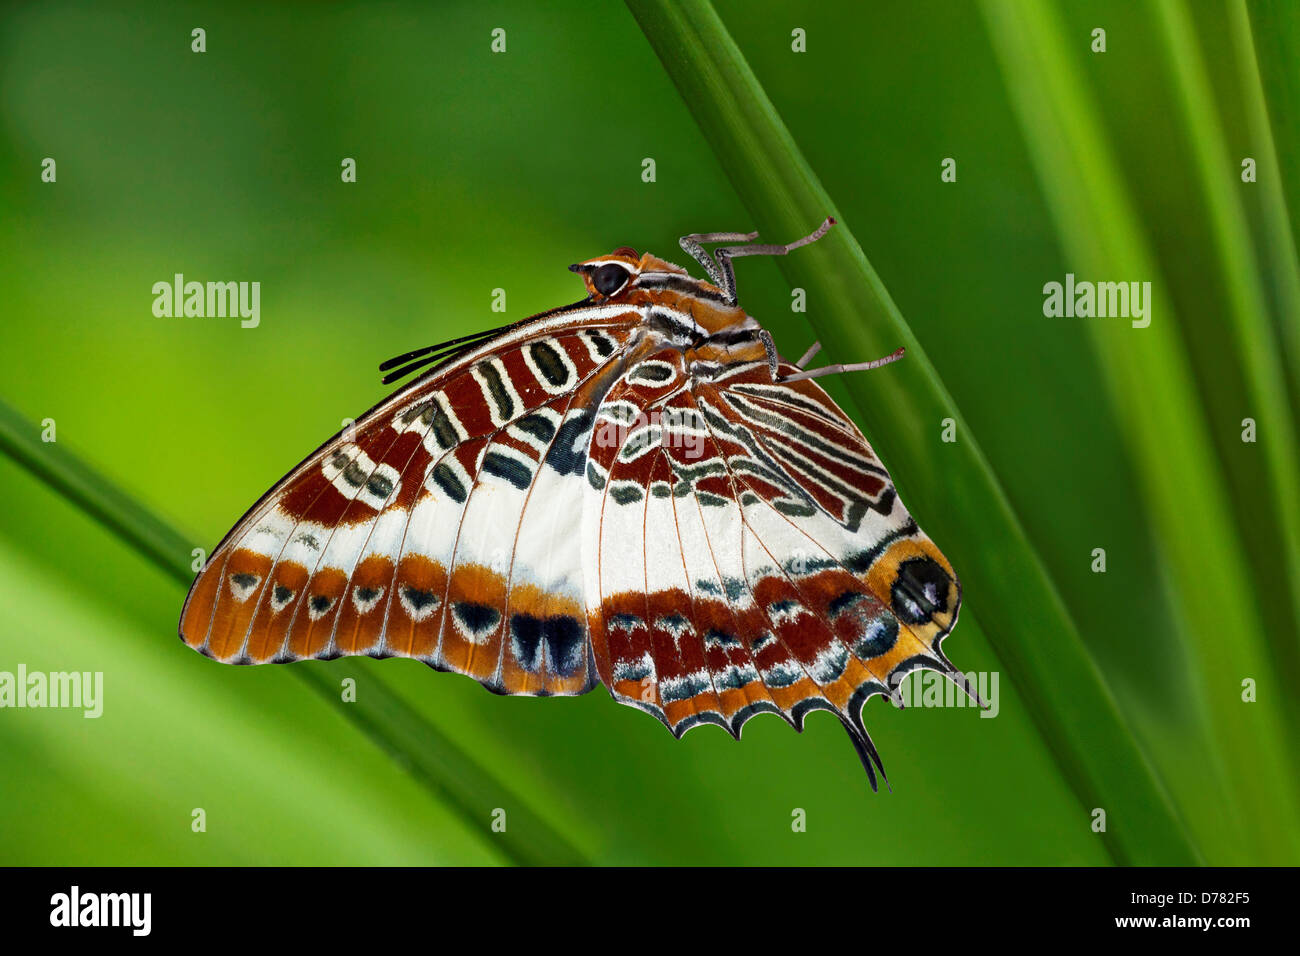 White-barred charaxes butterfly Charaxes brutus perched on green stem Stock Photo